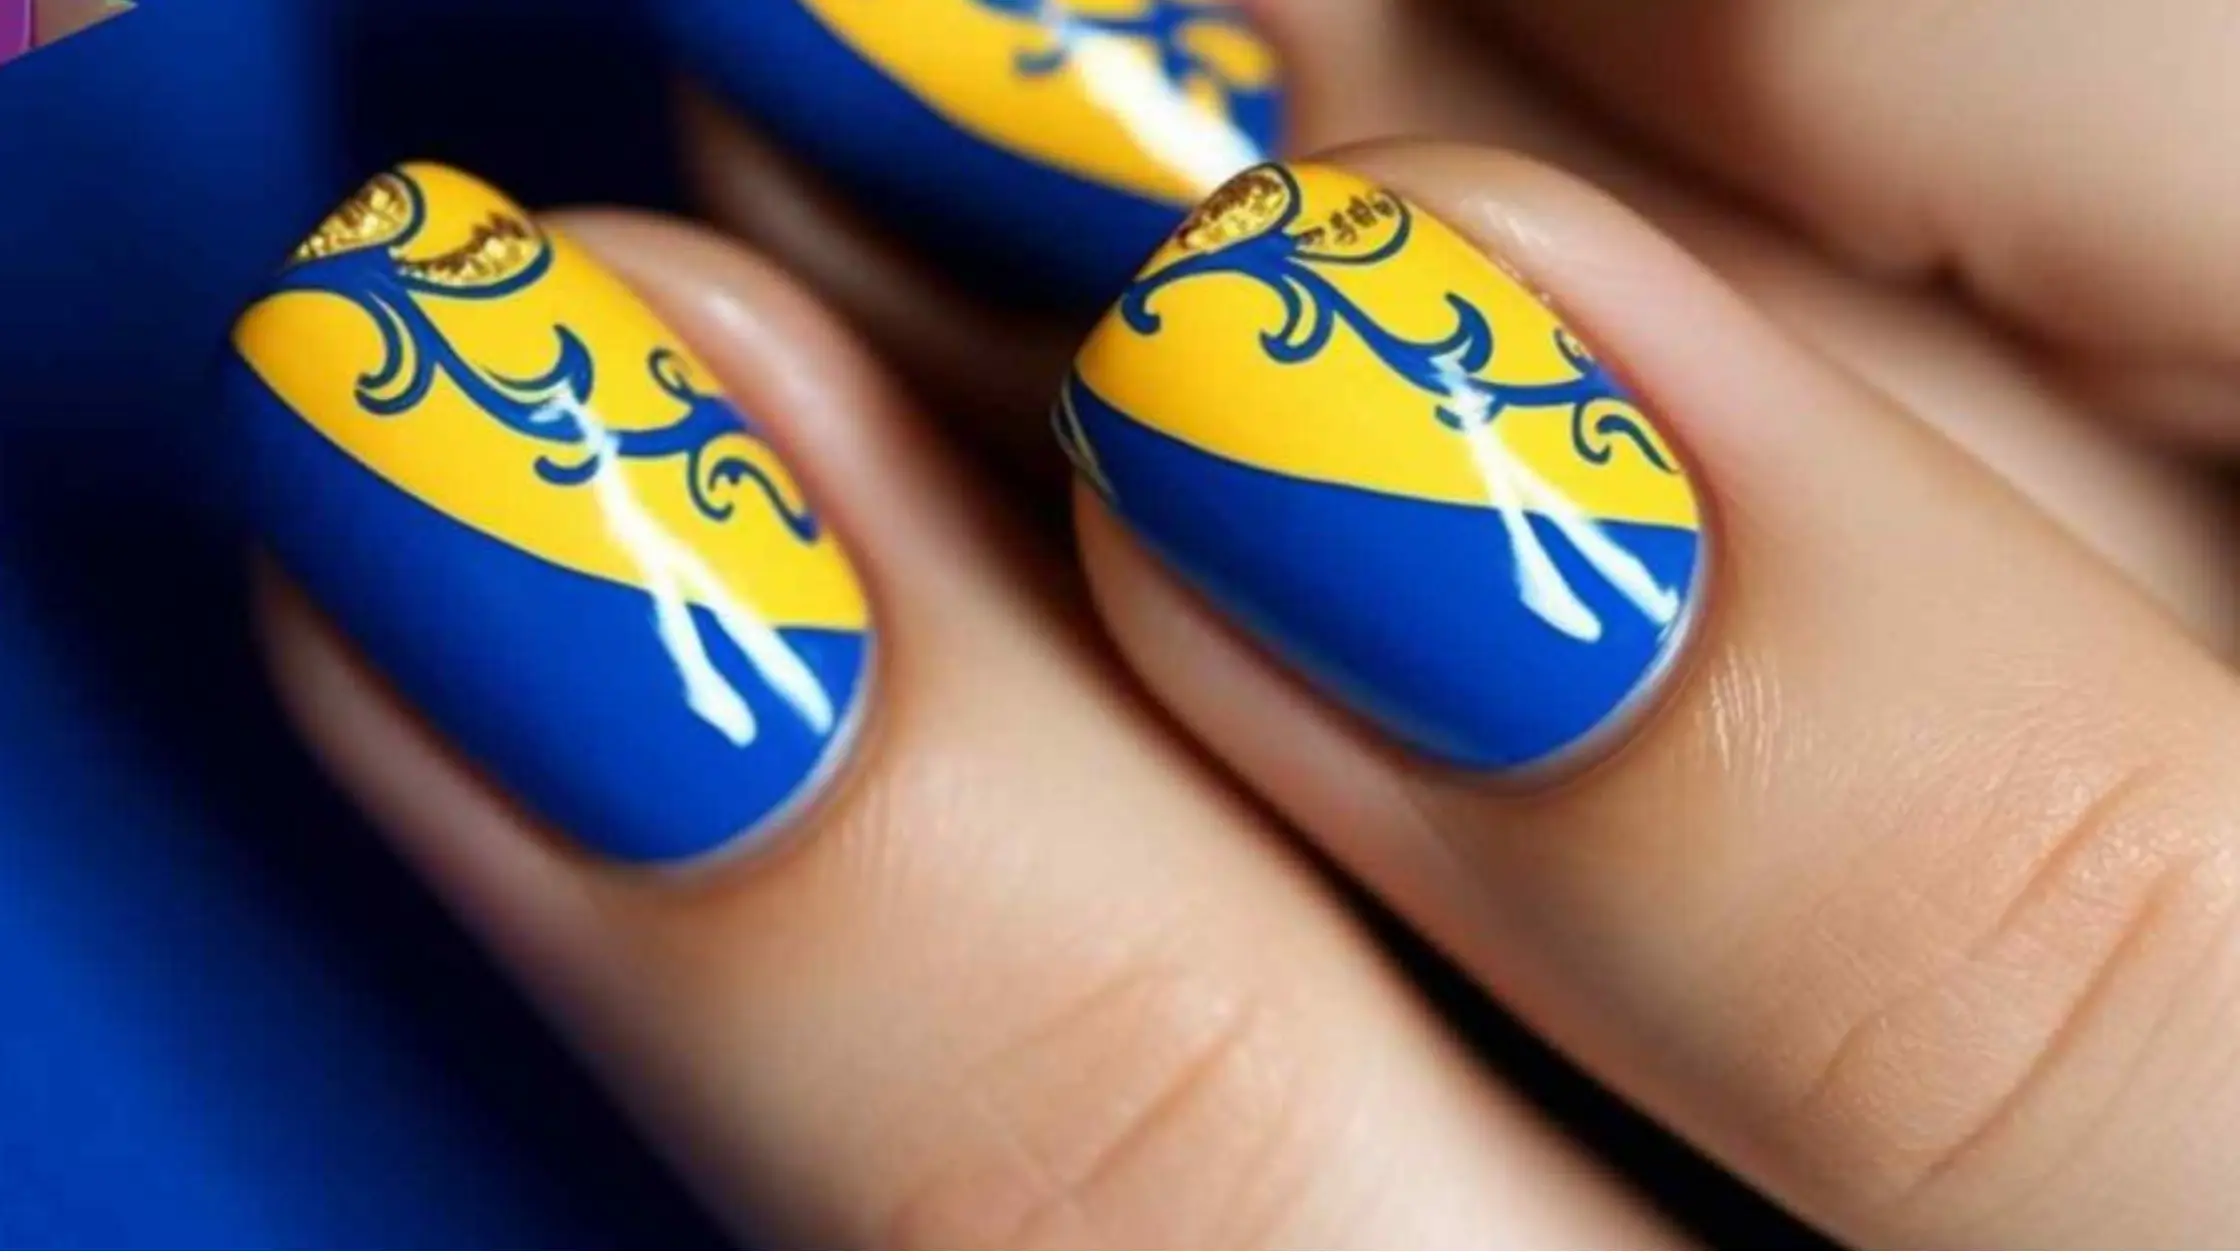 blue and yellow nail designs